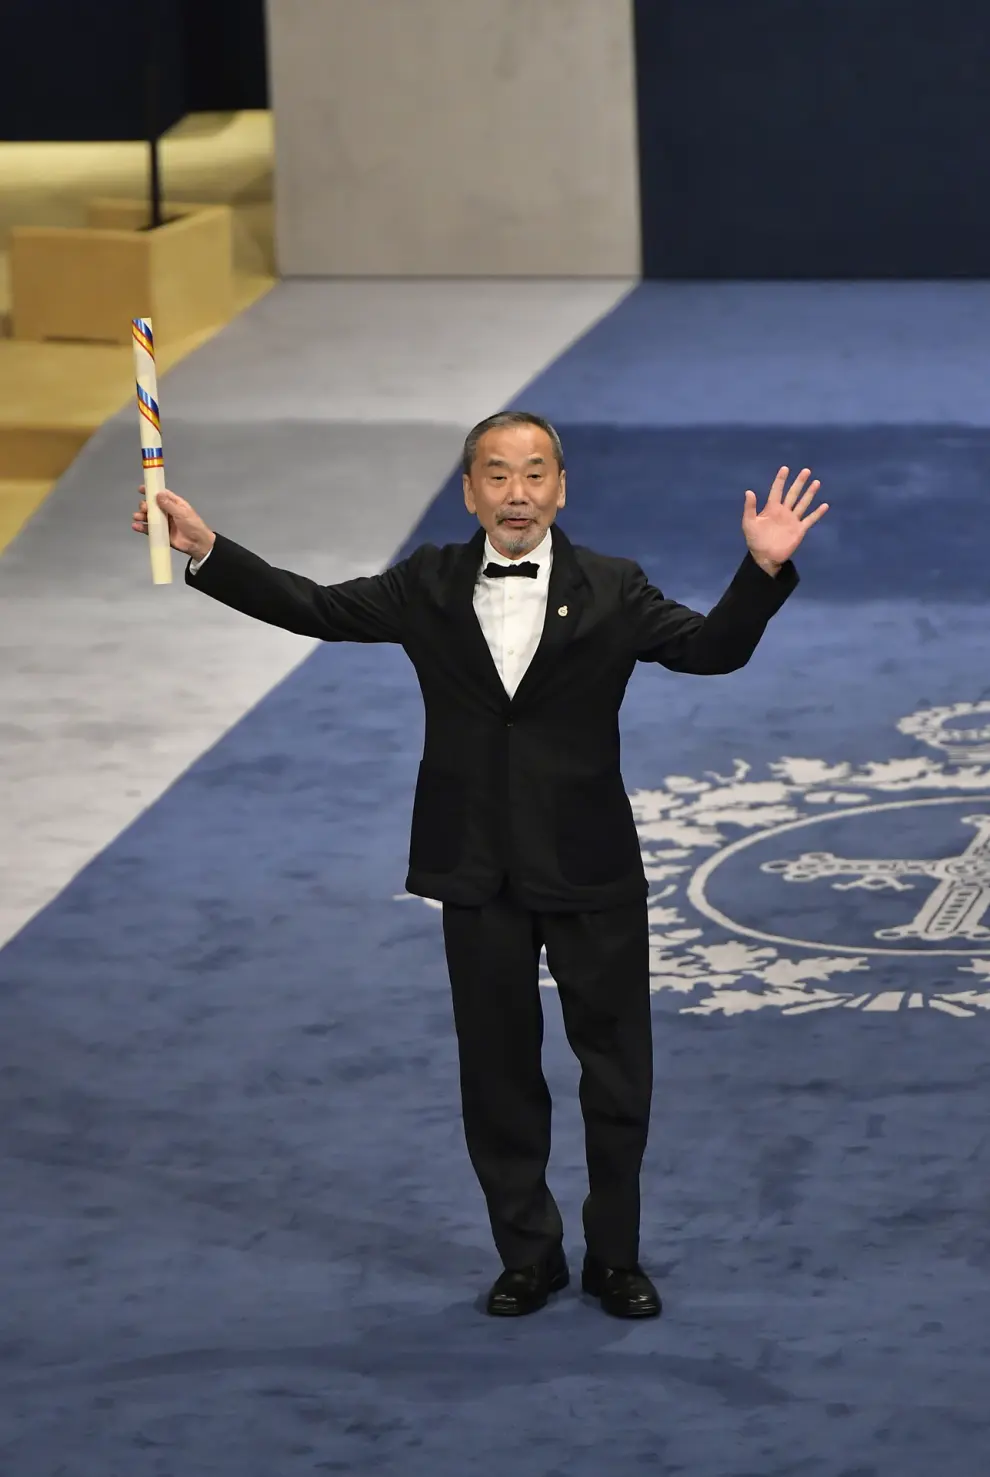 Japanese author Haruki Murakami reacts after receiving the Princess of Asturias Award for Literature during the awards ceremony in Oviedo, northern Spain, Friday, Oct. 20, 2023. The awards, named after the heir to the Spanish throne, are among the most important in the Spanish-speaking world. (AP Photo/Alvaro Barrientos)